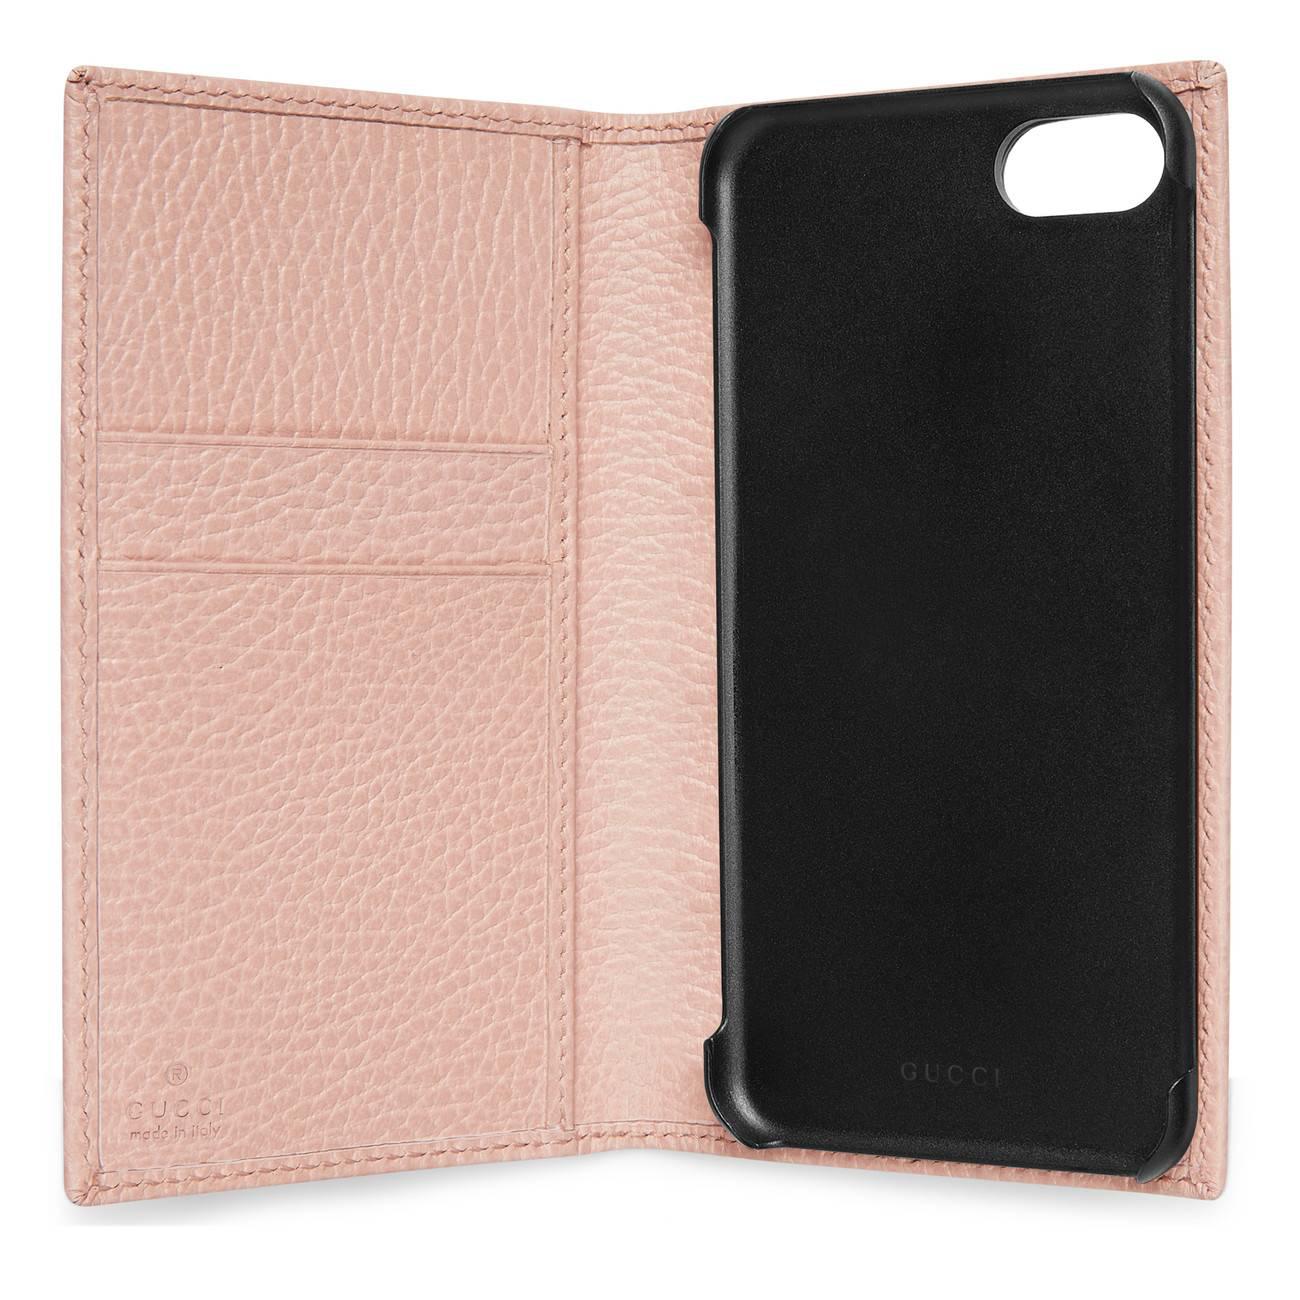 Gucci GG Marmont Iphone 7/8 Wallet Case in Pink - Lyst